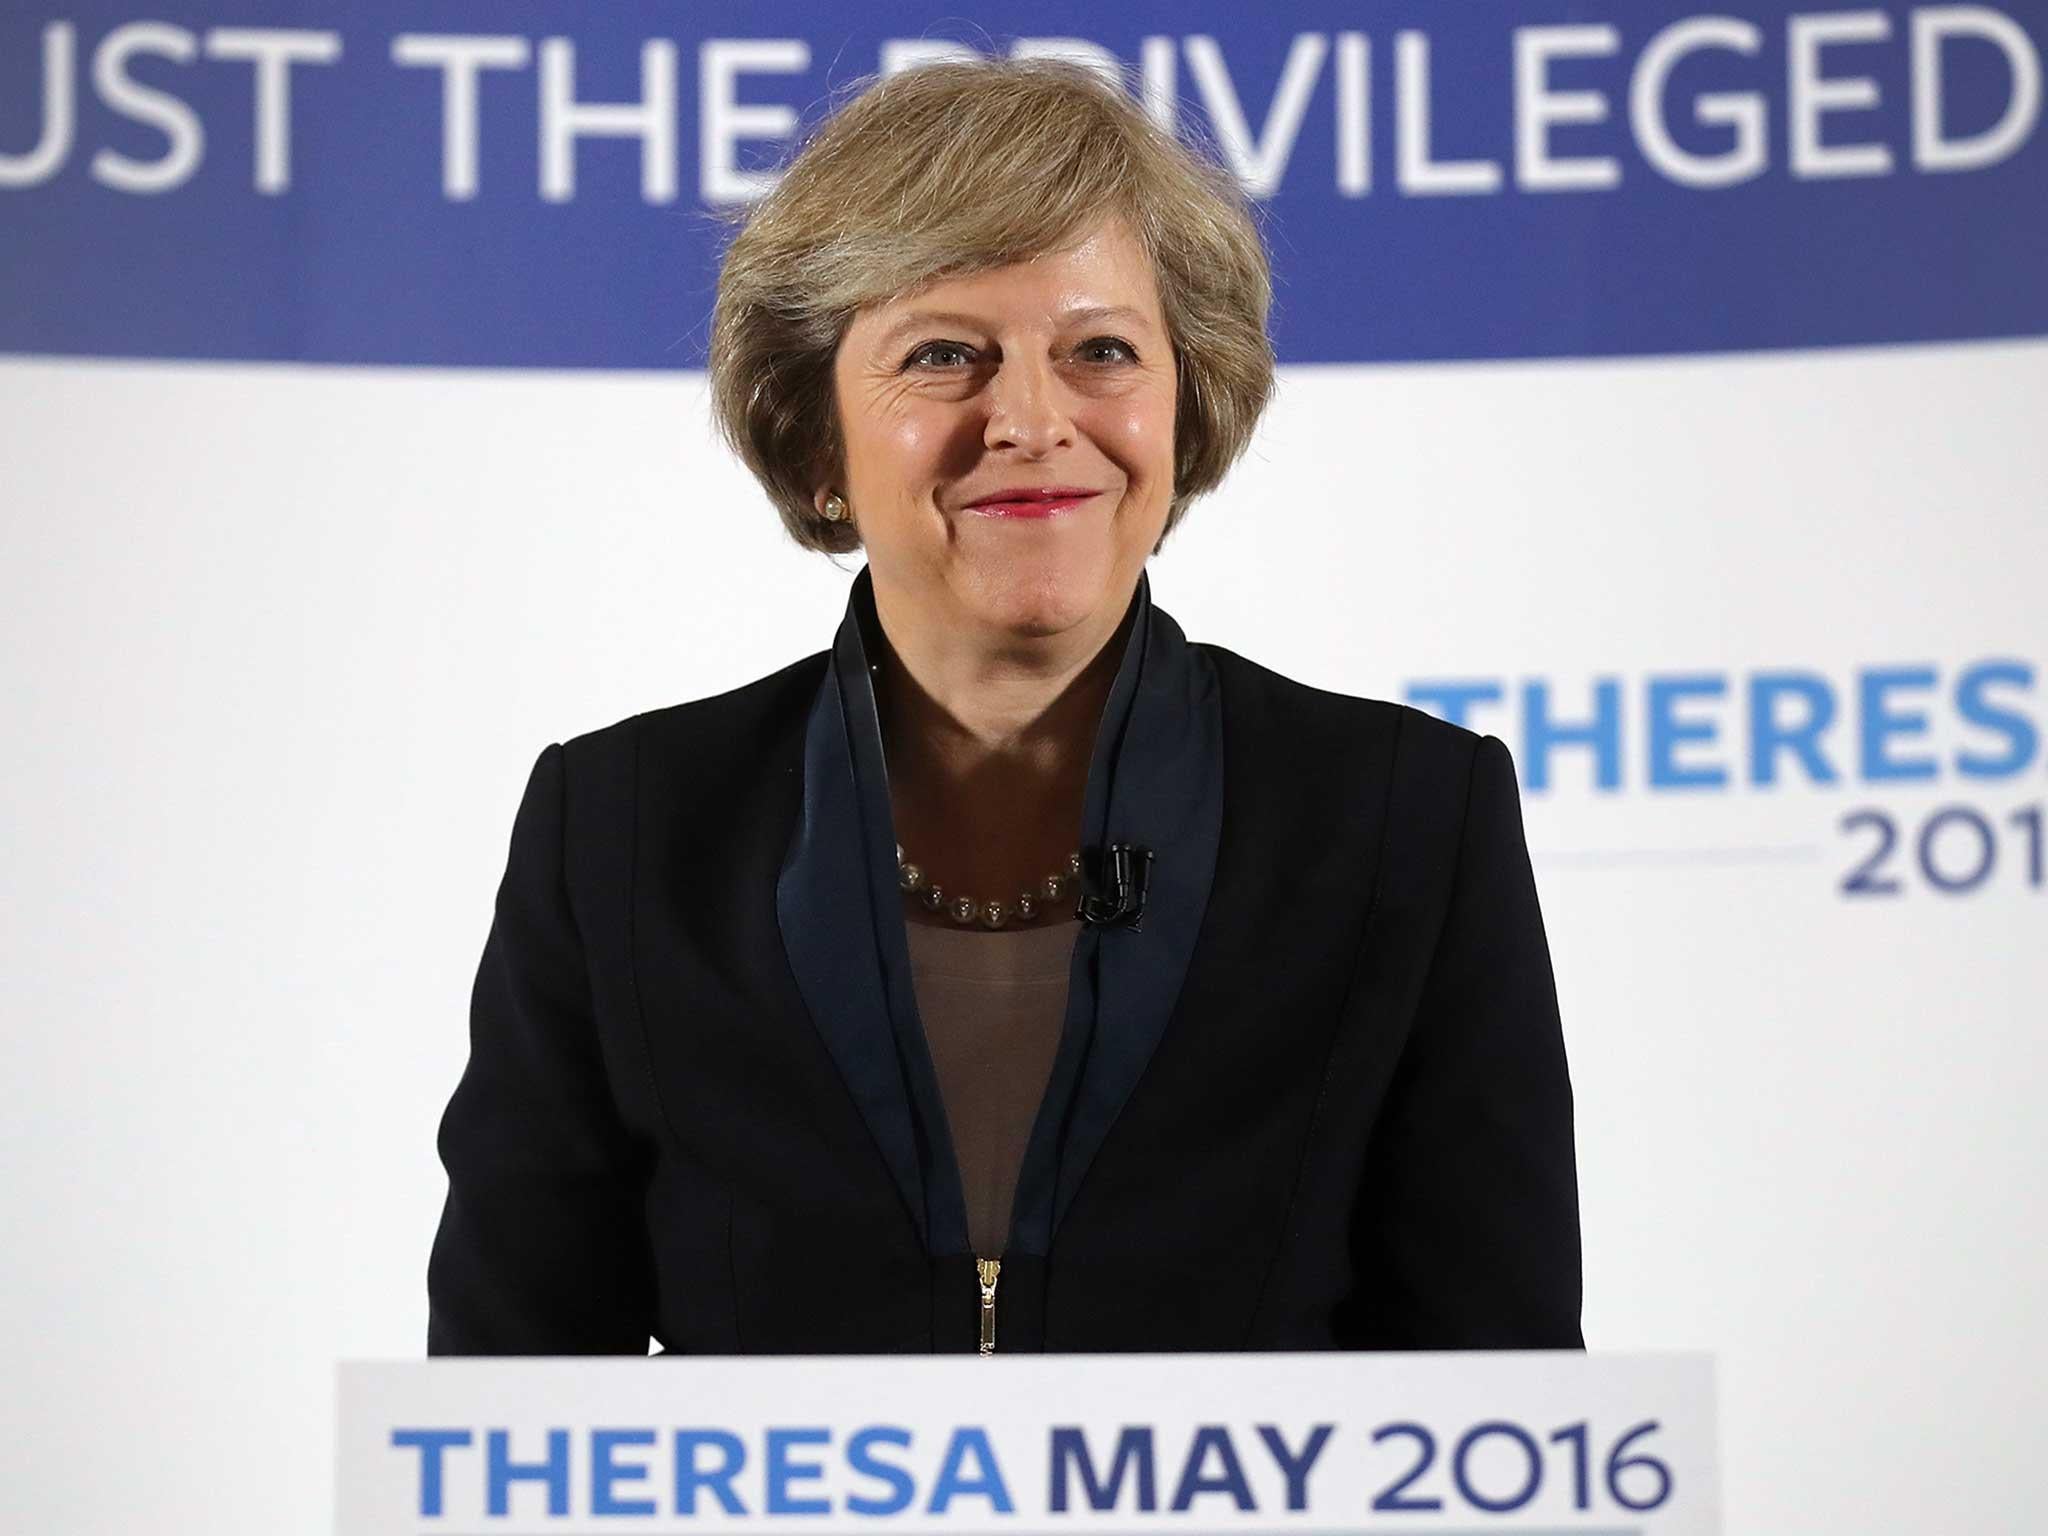 Theresa May launches her Conservative party leadership campaign at the IET events venue in Birmingham